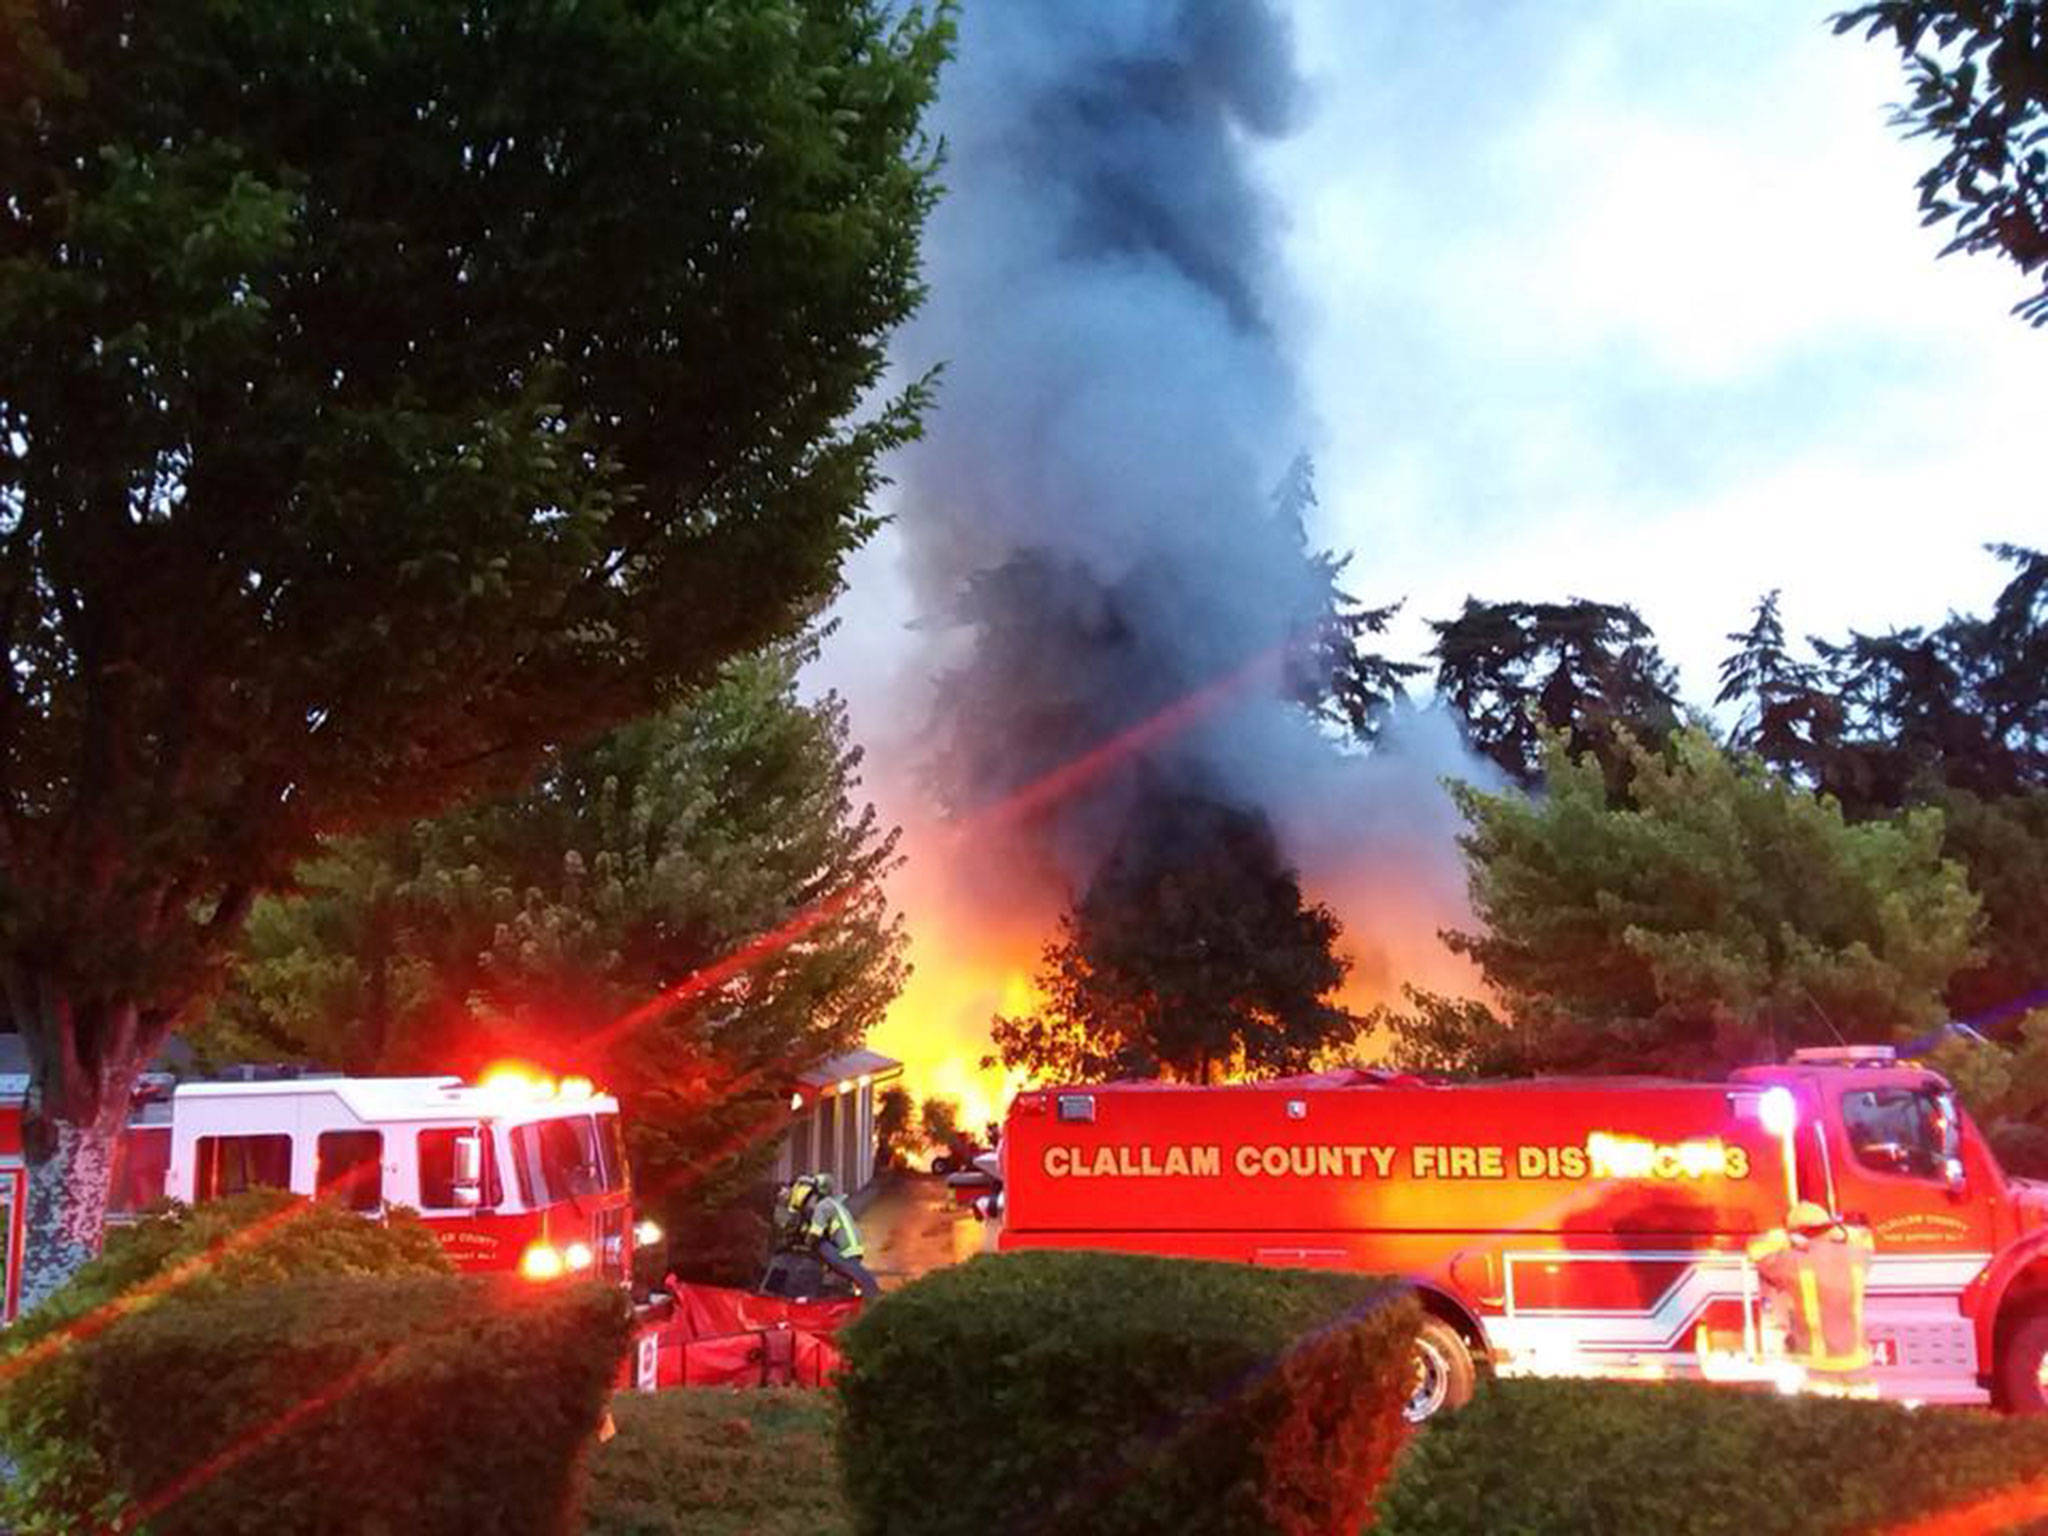 Fire crews with Clallam County Fire District 3 respond to Cedars at Dungeness early Sunday morning where an approximate 24-foot-by-100-foot building was on fire. An estimated 50 golf carts were destroyed.  Photo courtesy of Clallam County Fire District 3